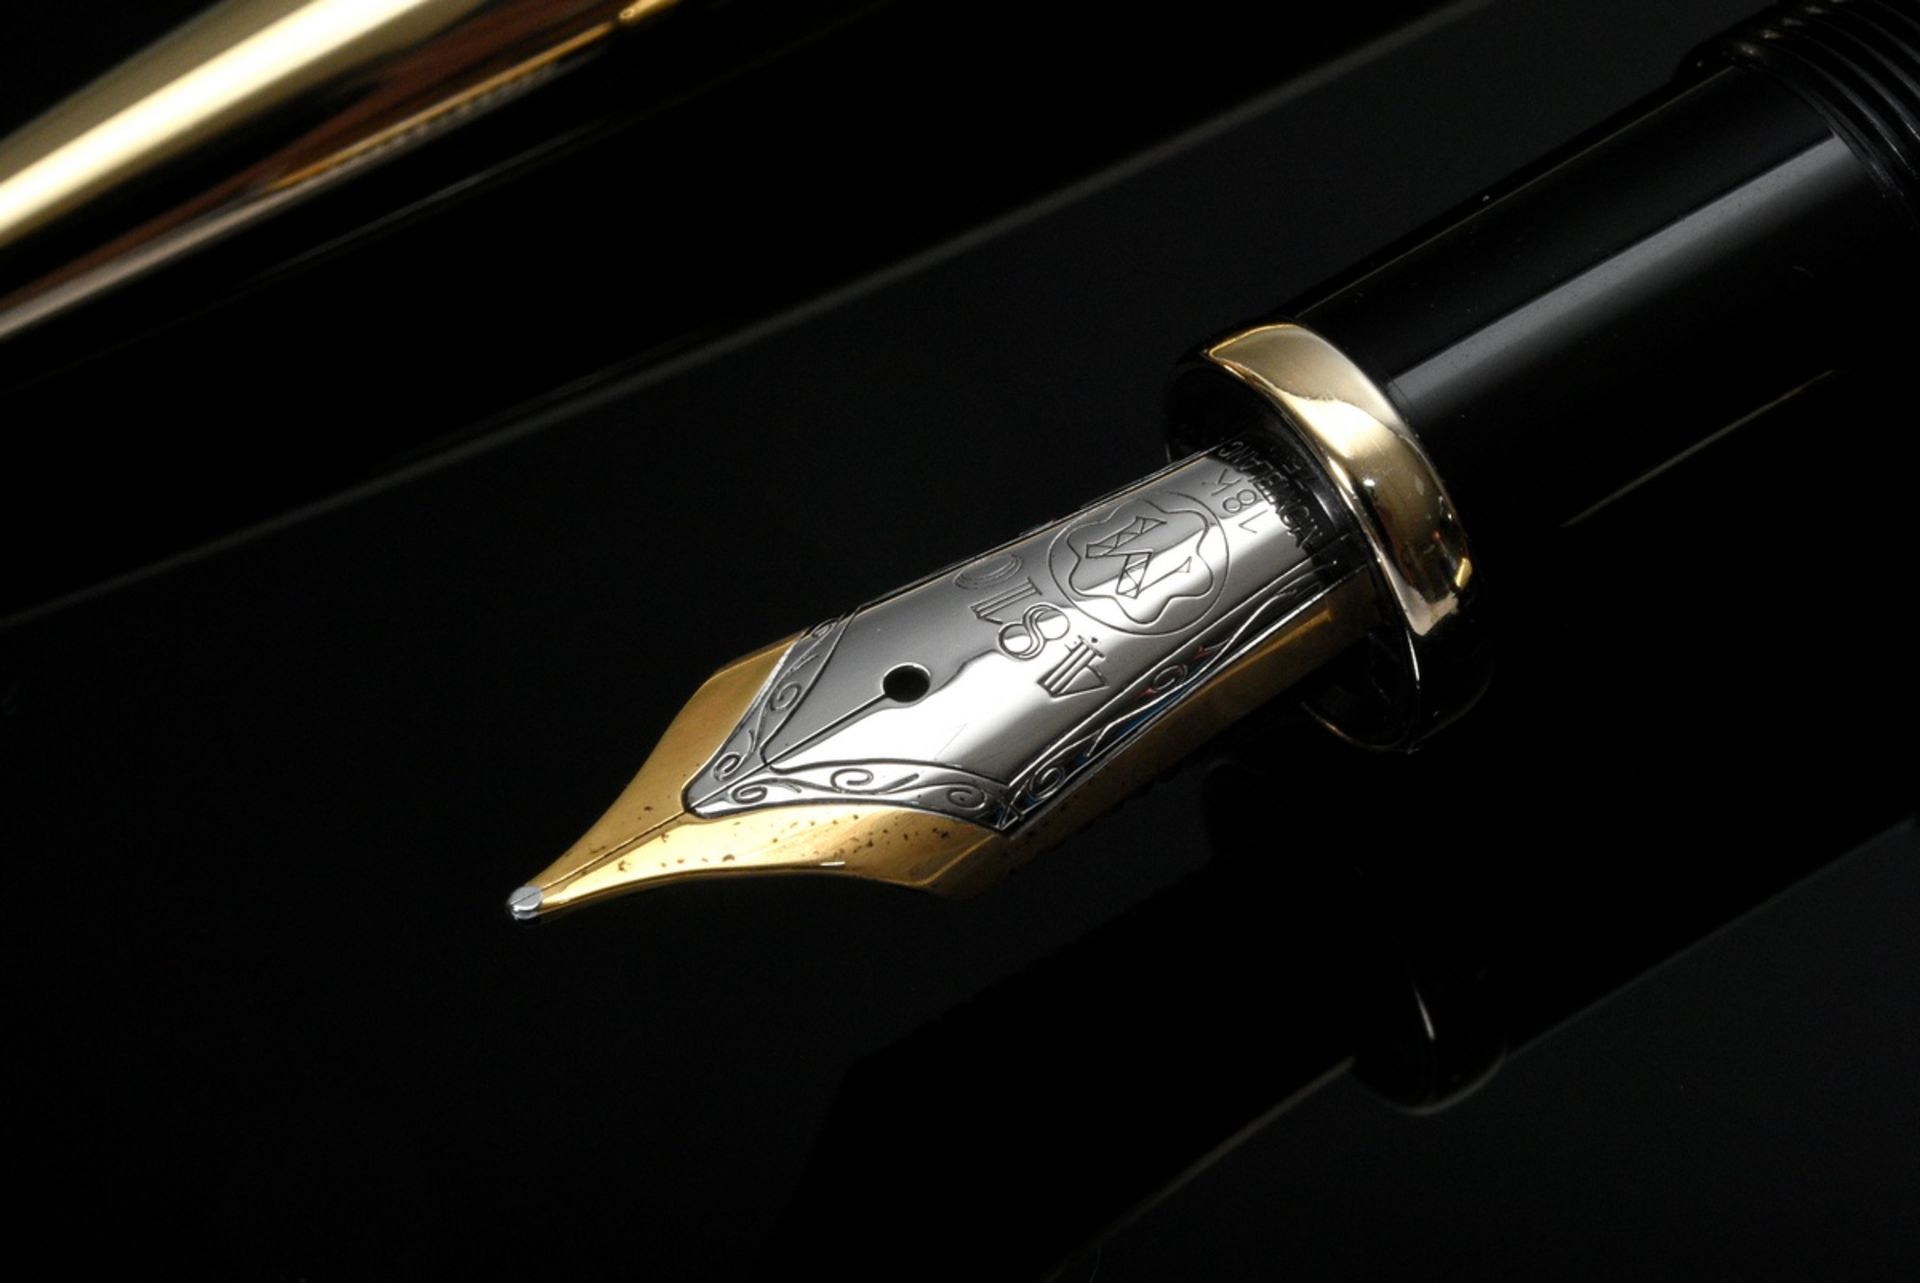 2 Pieces Montblanc fountain pen and biros: "Meisterstück Solitaire Citrine", stainless steel gold p - Image 4 of 7